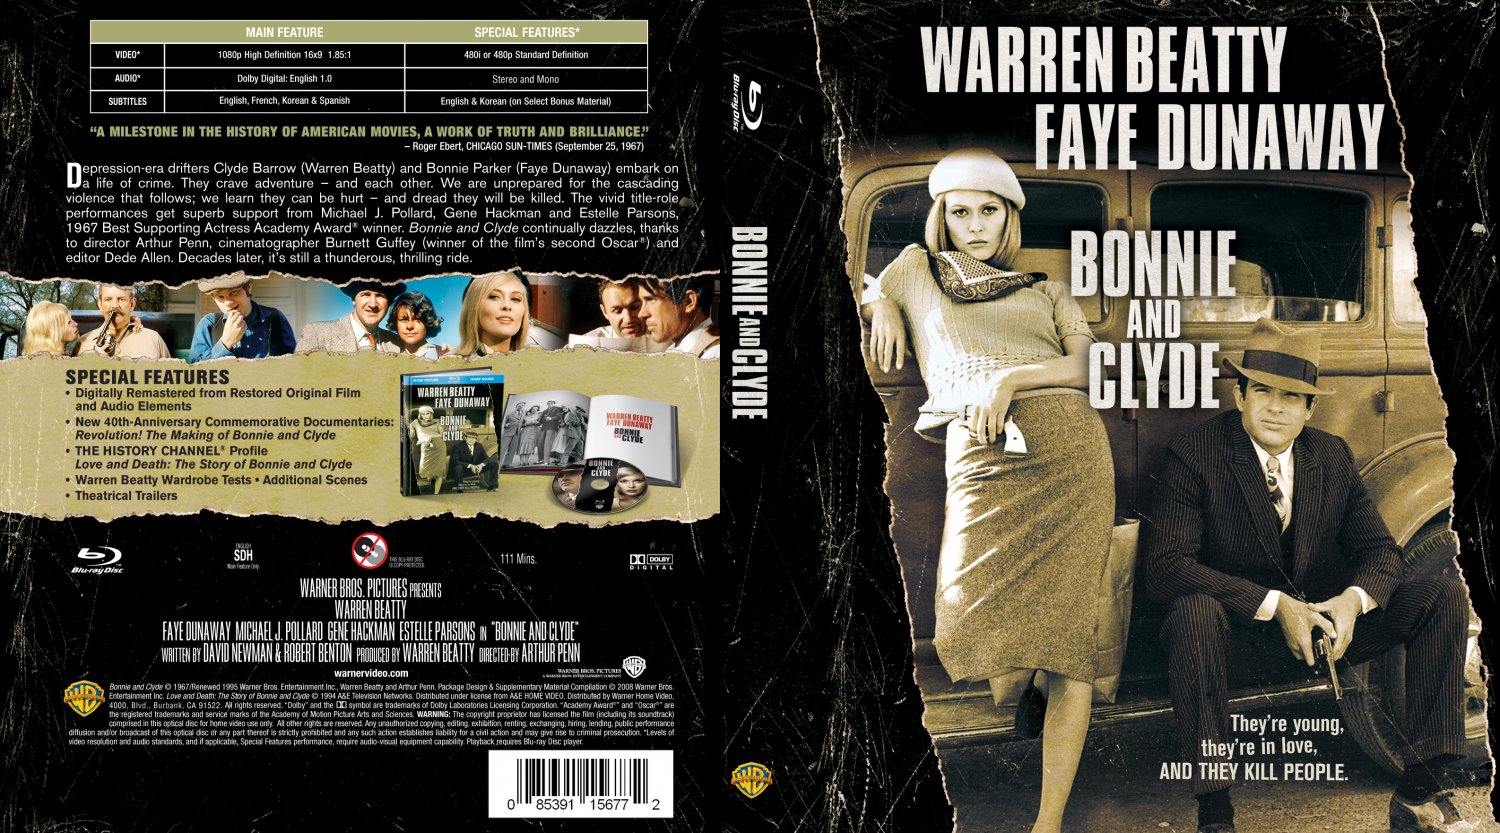 Bonnie And Clyde Movie Blu Ray Scanned Covers